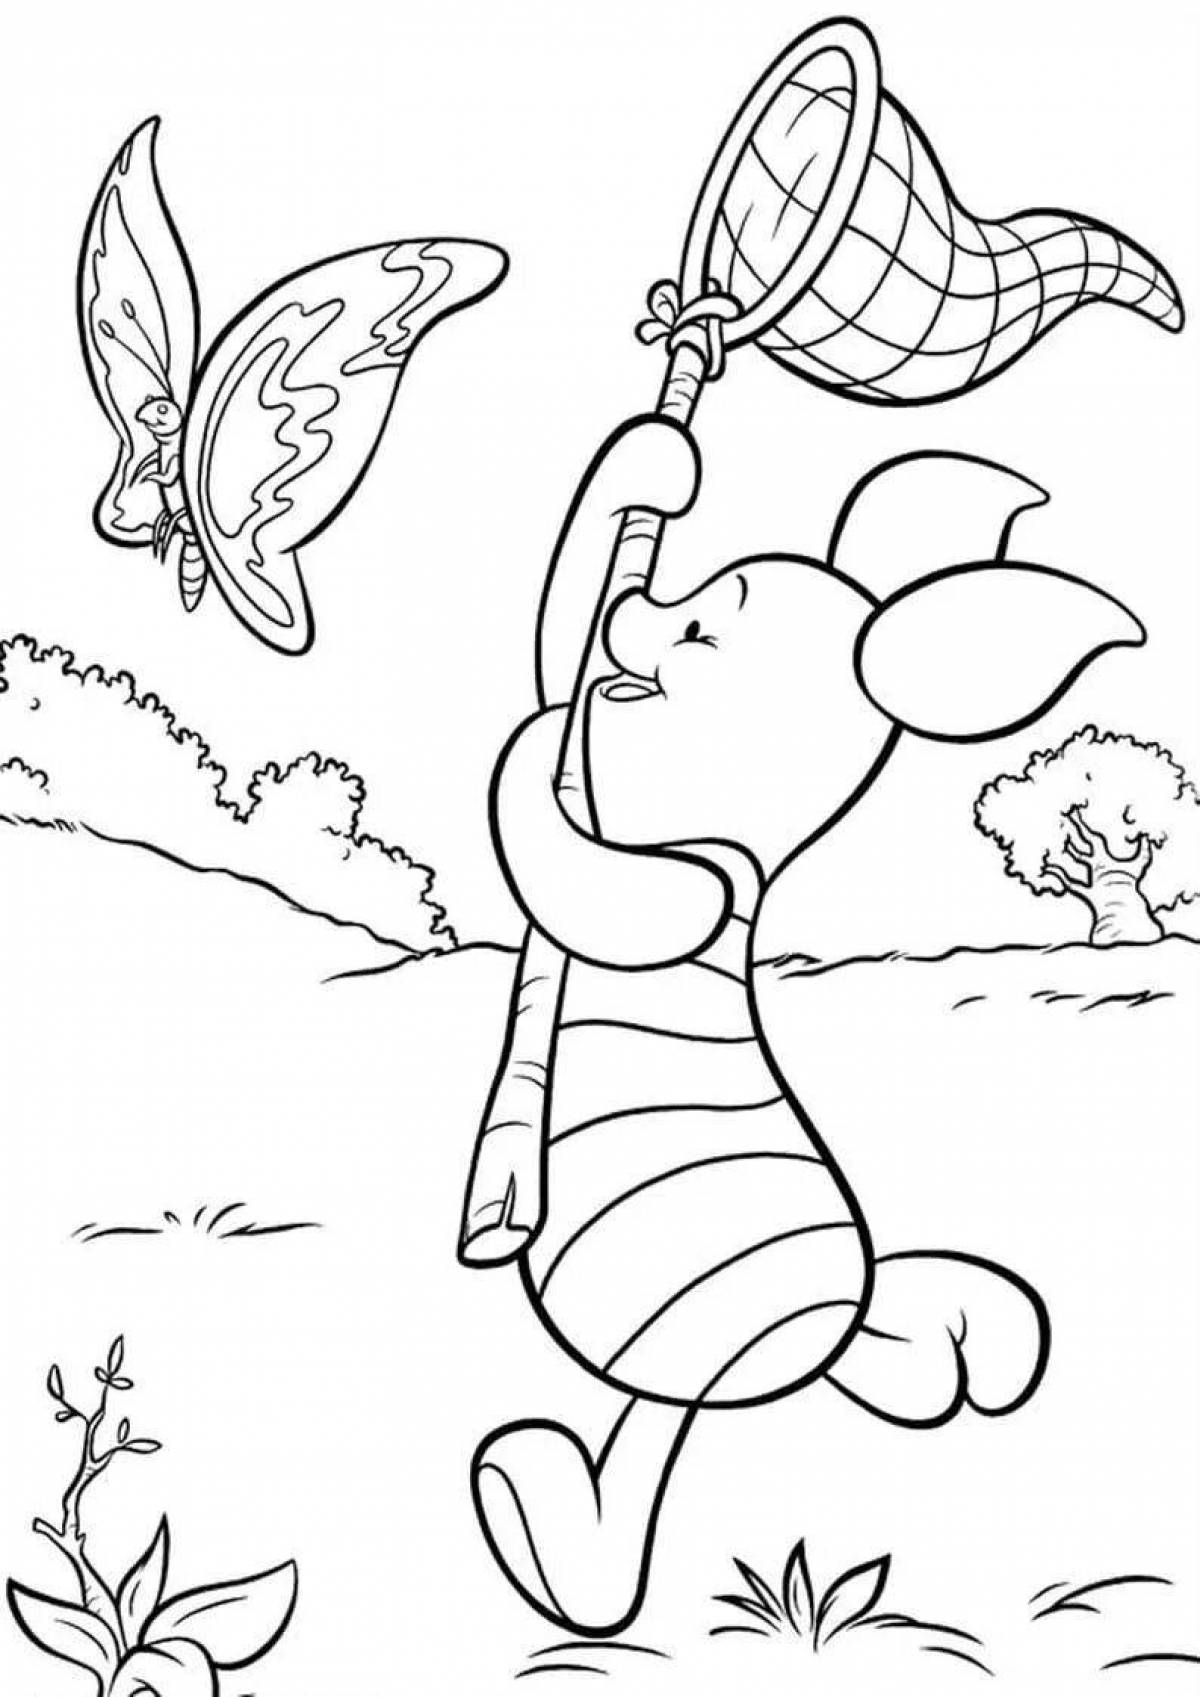 Coloring comic winnie the pooh and his friends